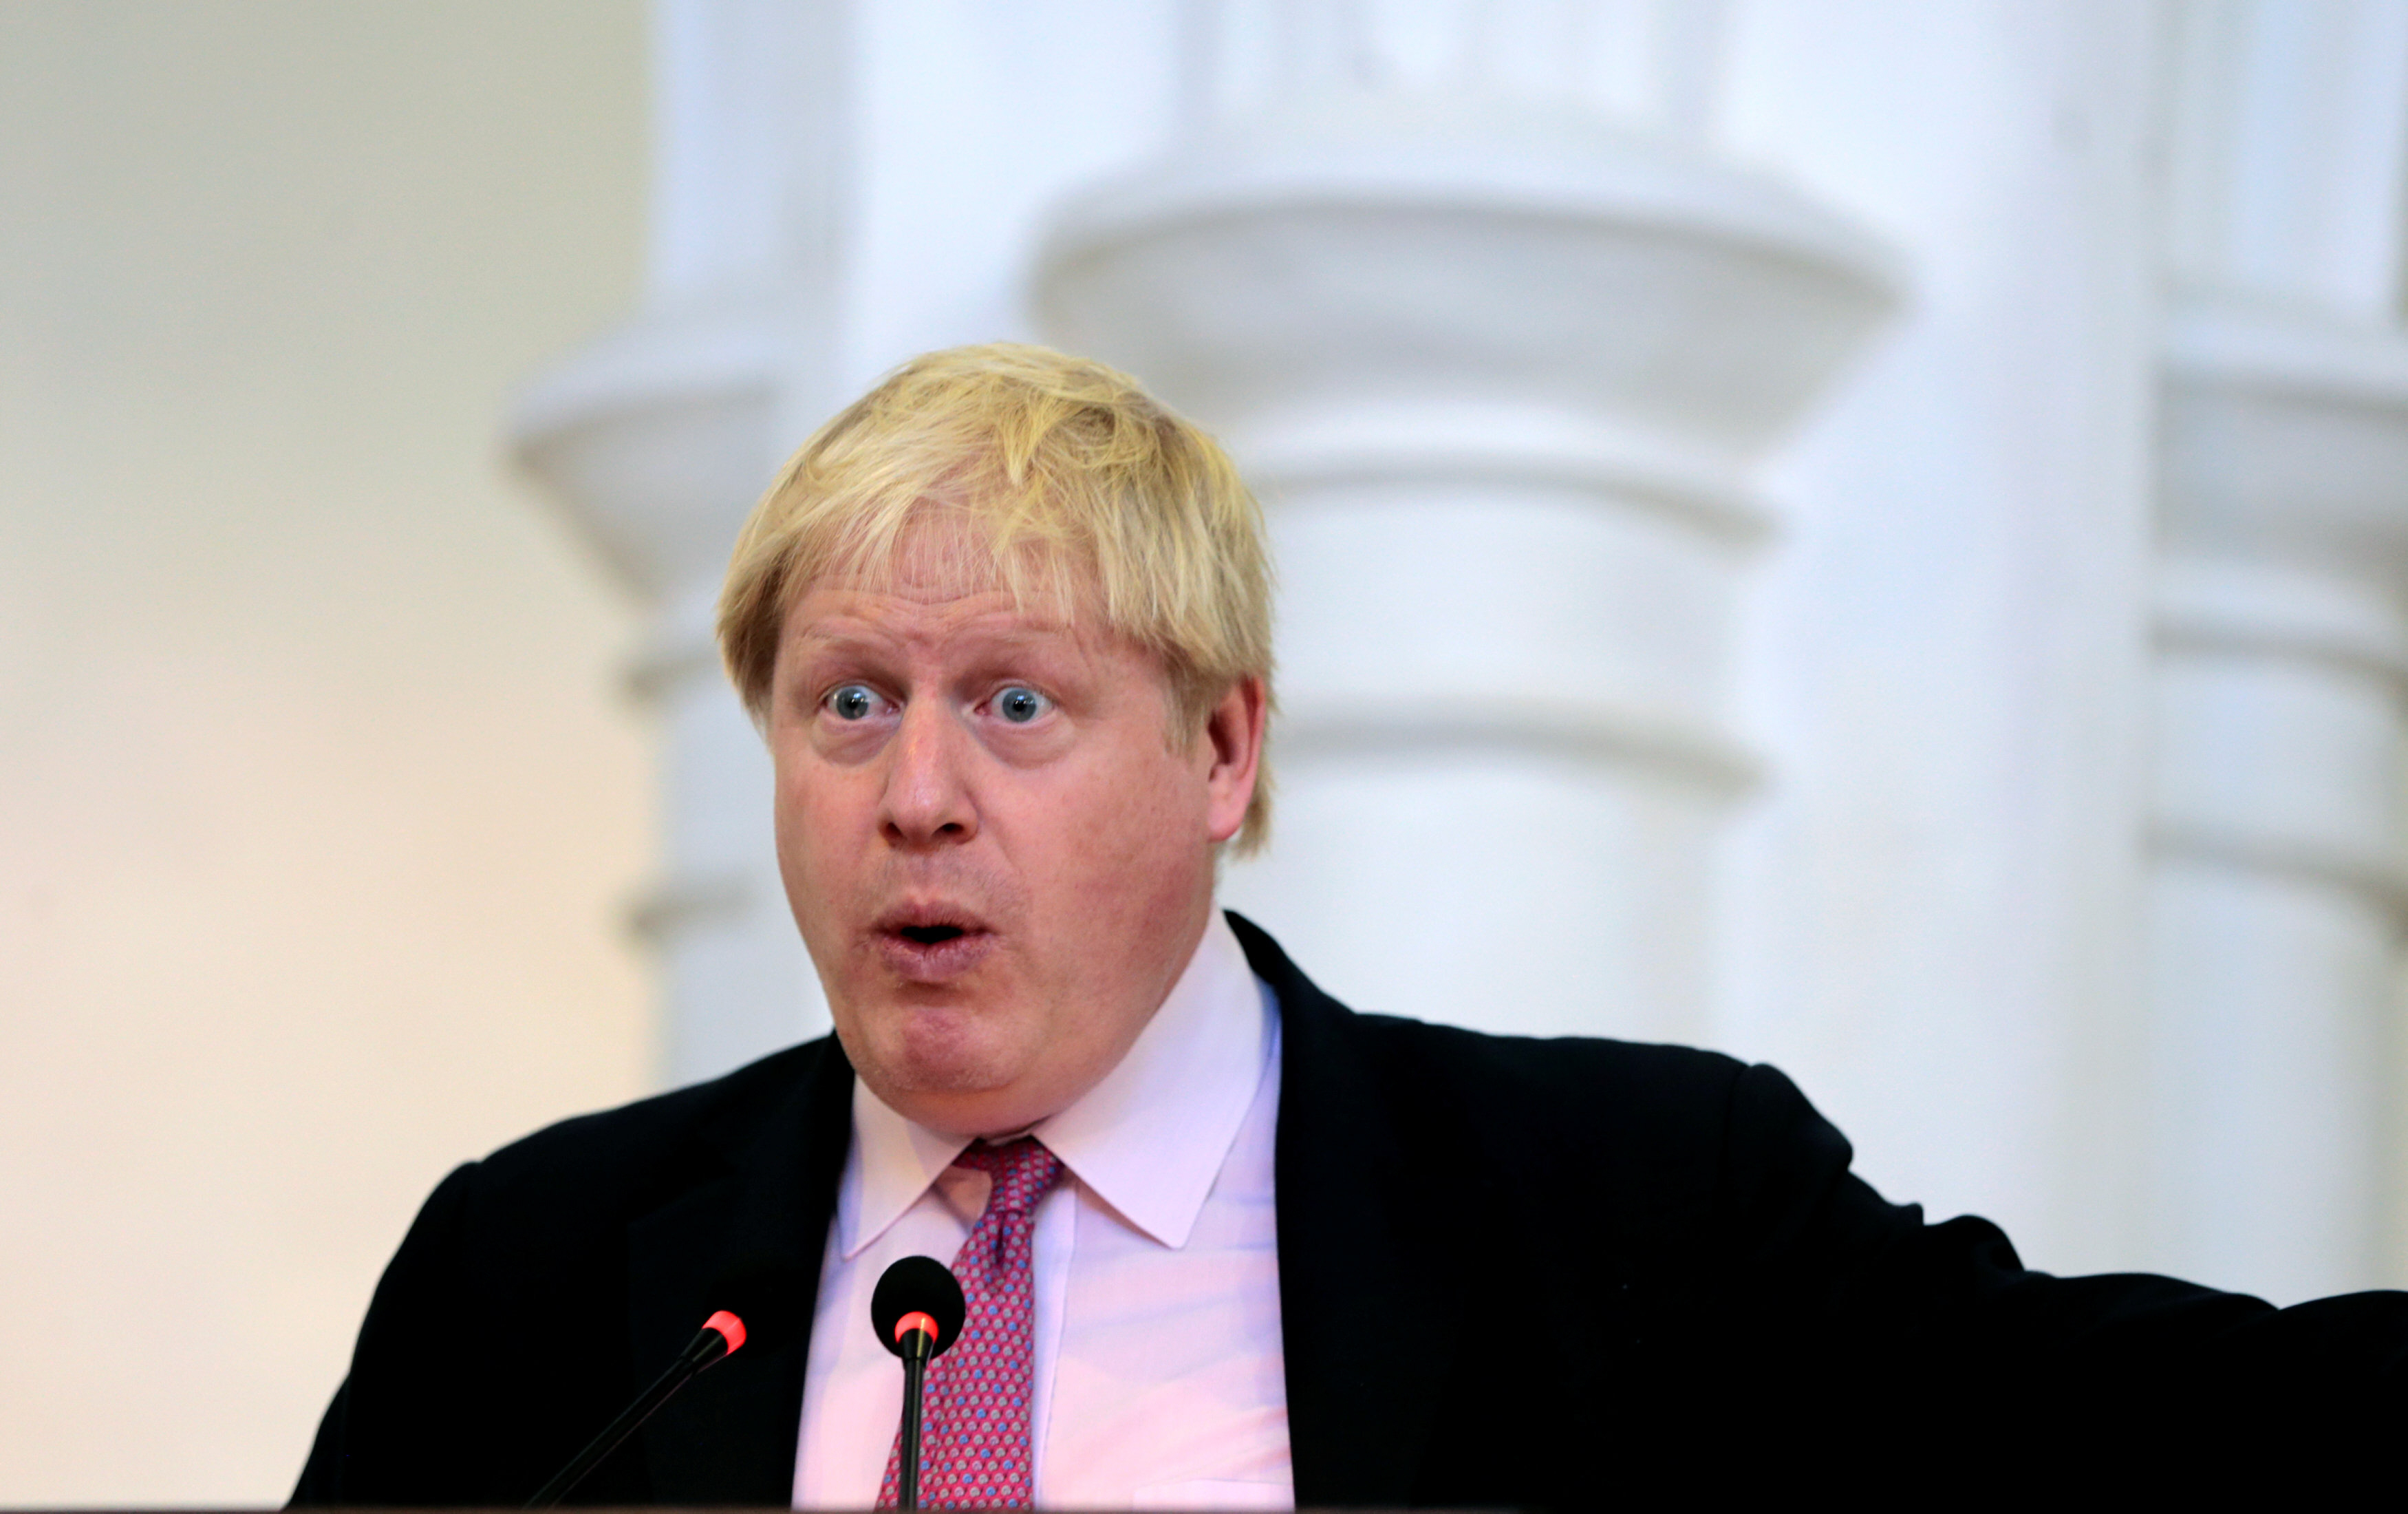 britain 039 s foreign secretary boris johnson delivers a speech in the main hall of the government college university in lahore november 25 2016 photo reuters